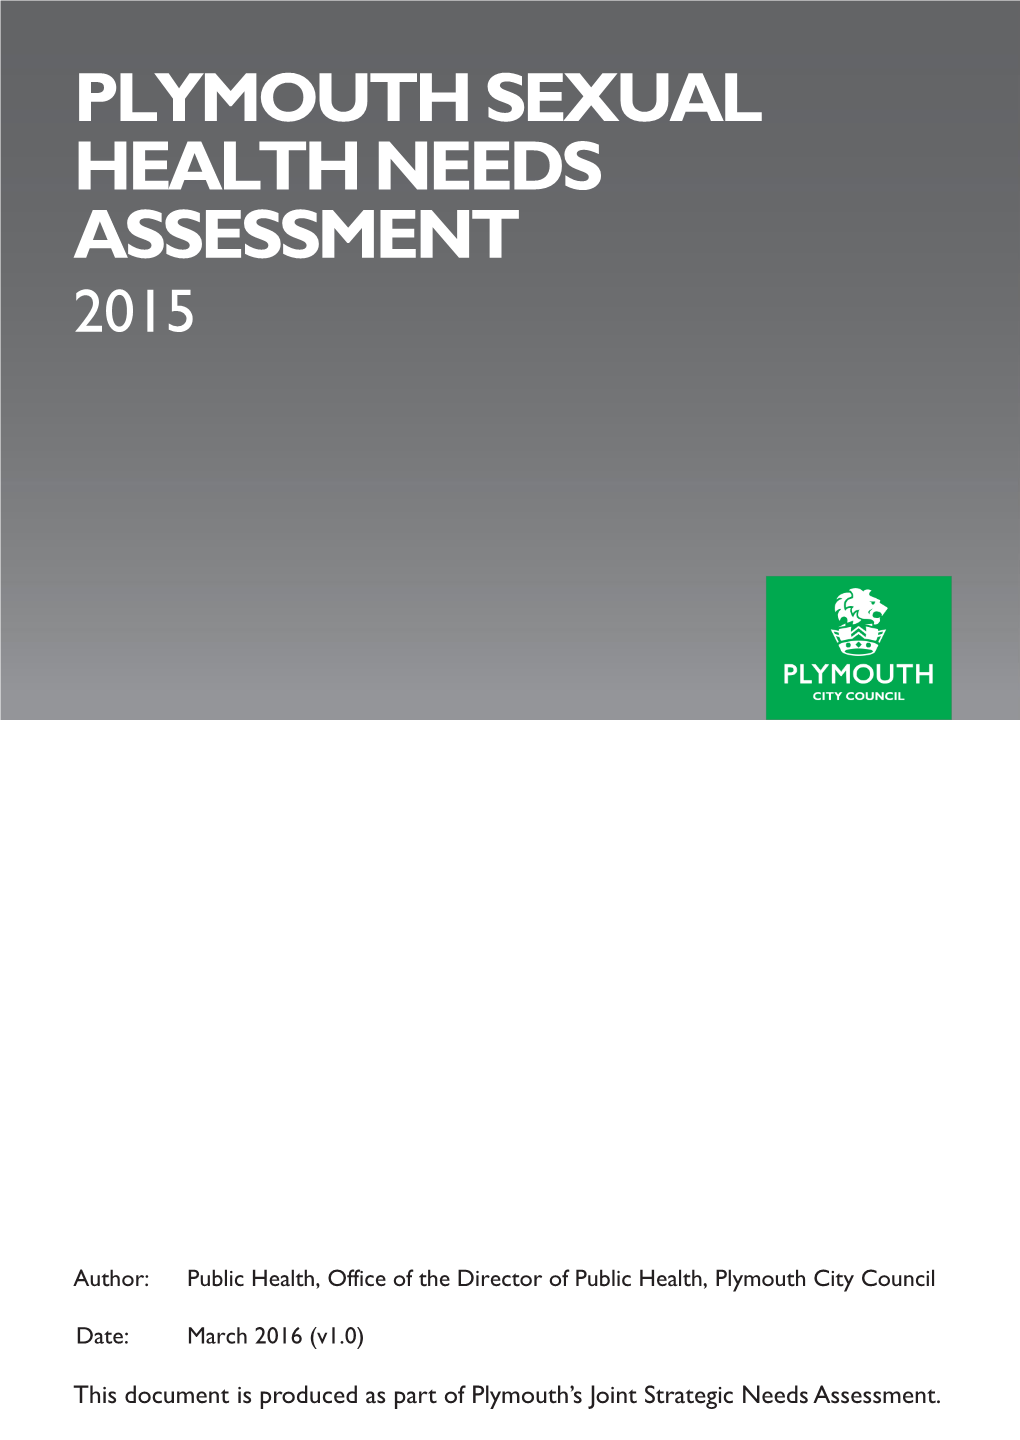 Sexual Health Needs Assessment for Plymouth (2015)